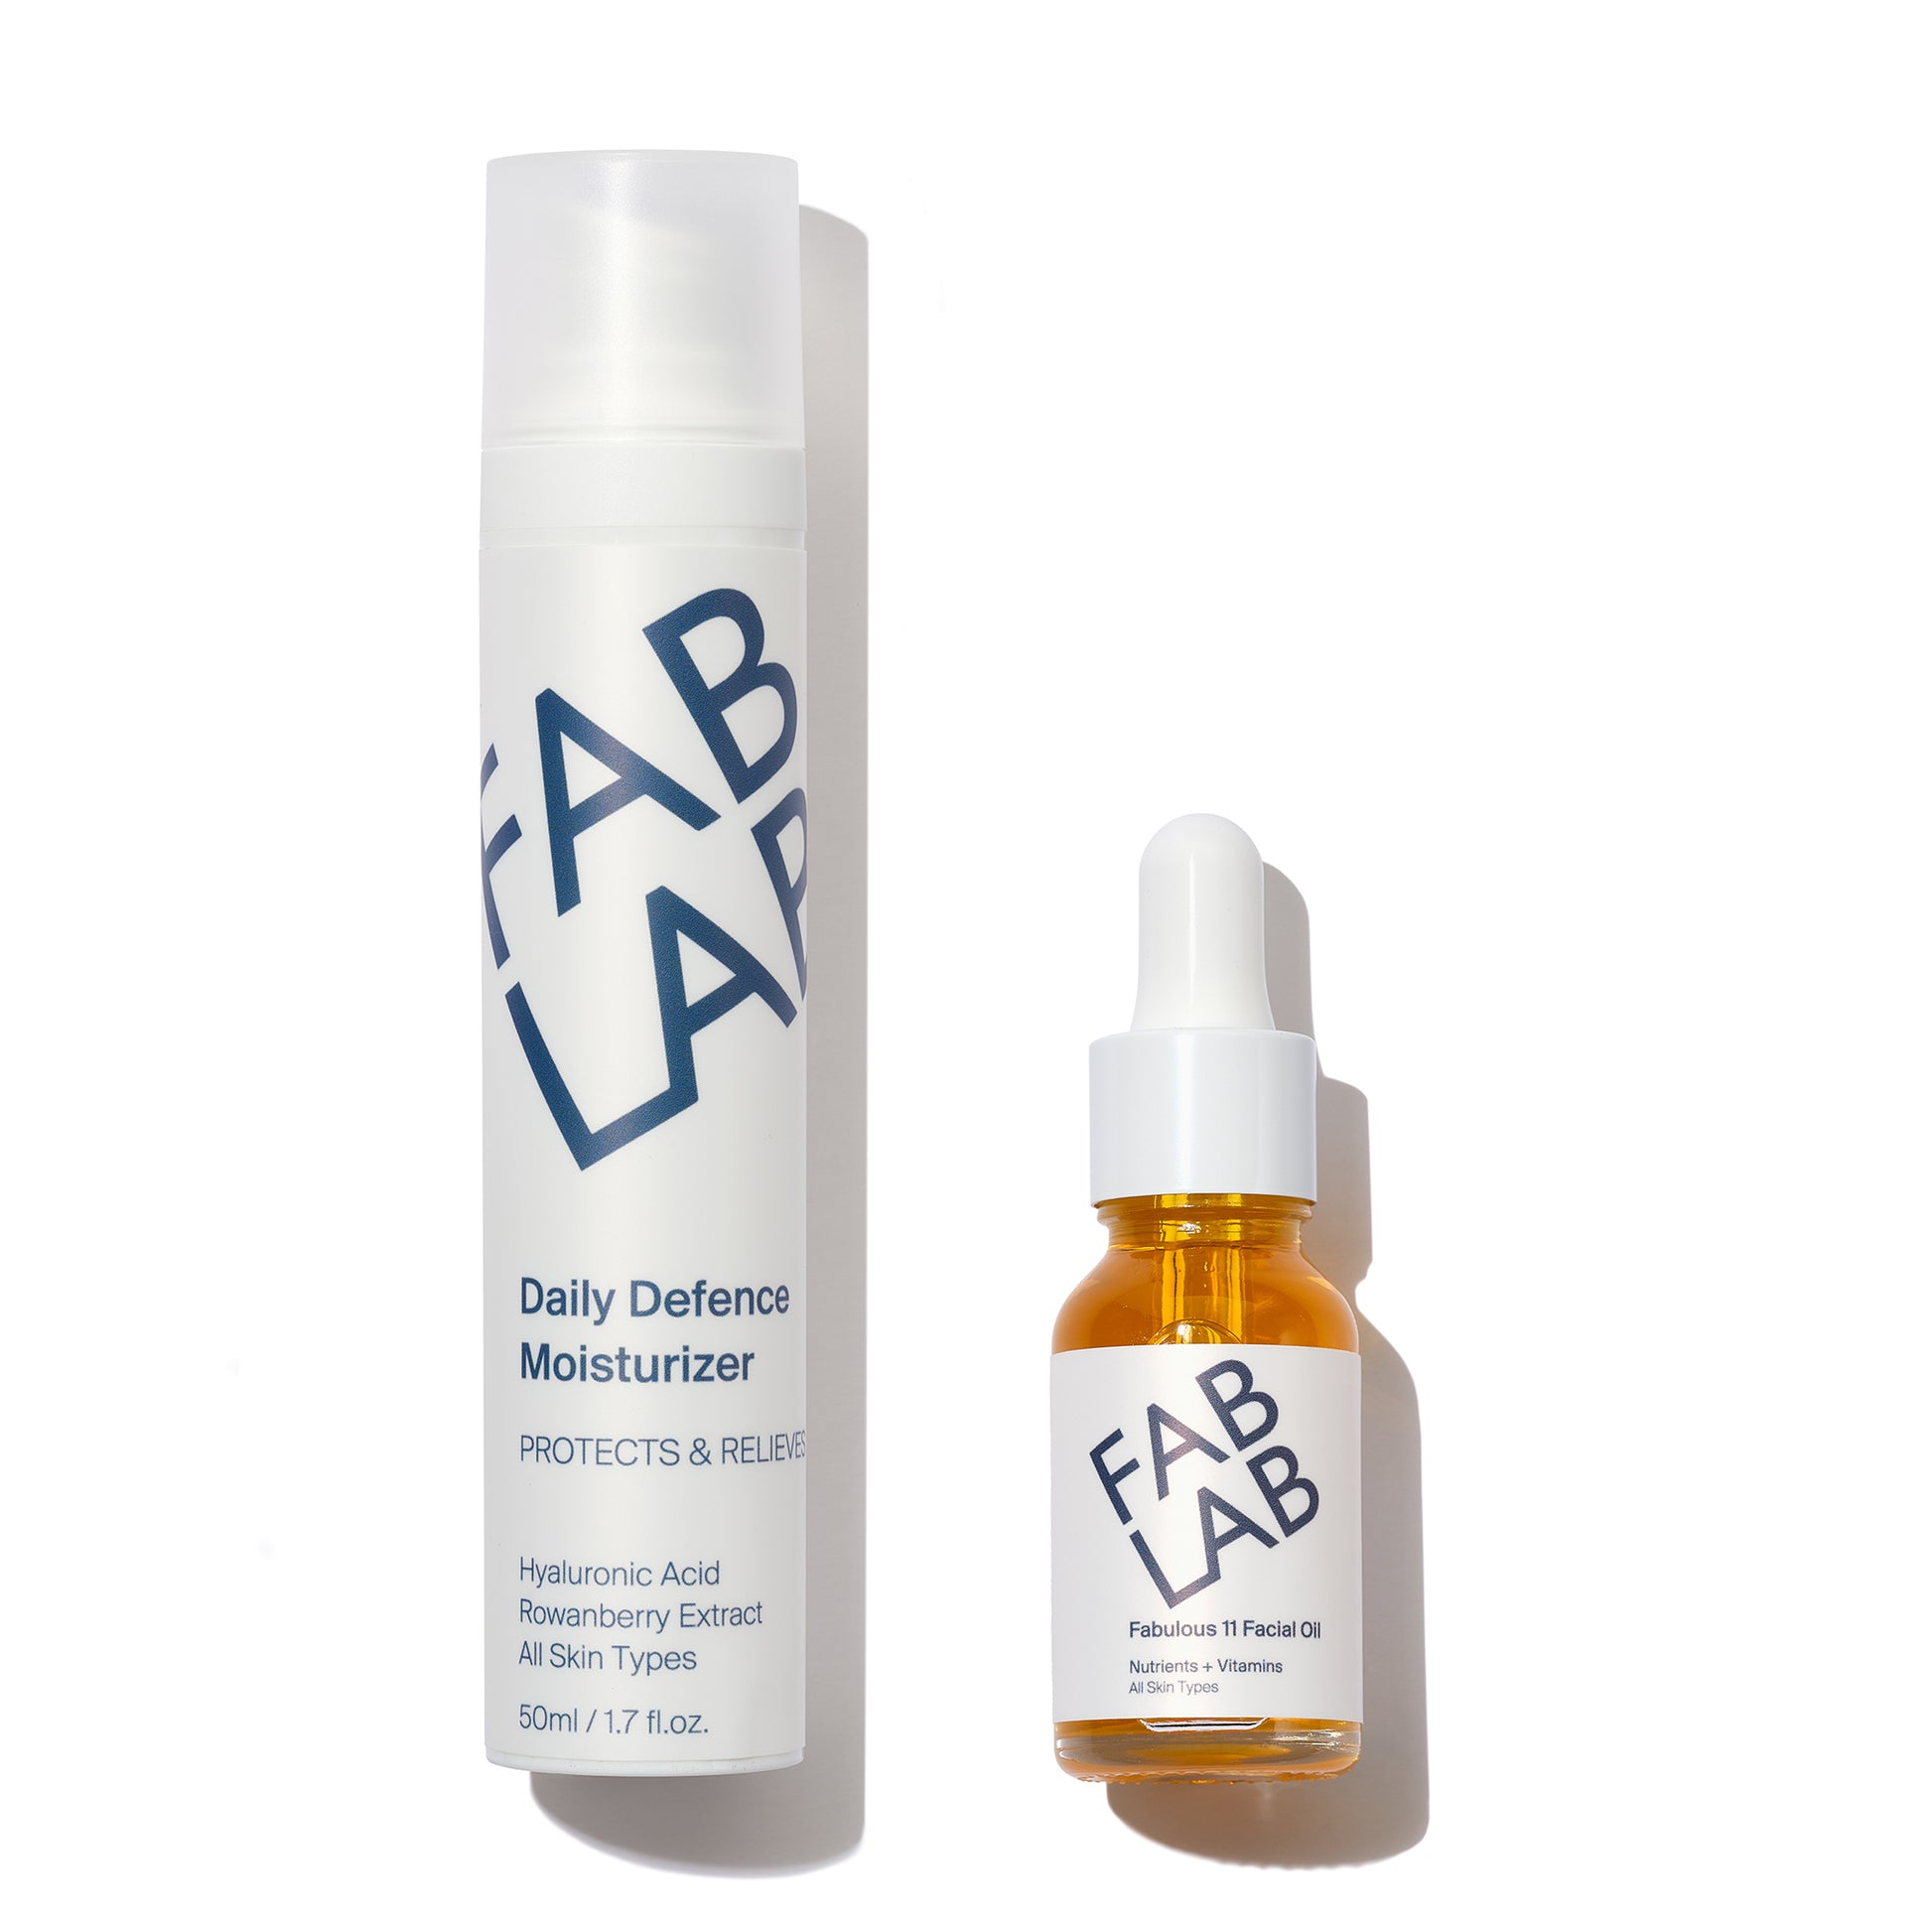 THE DEWY TWO - FABLAB Skincare - fablabskincare